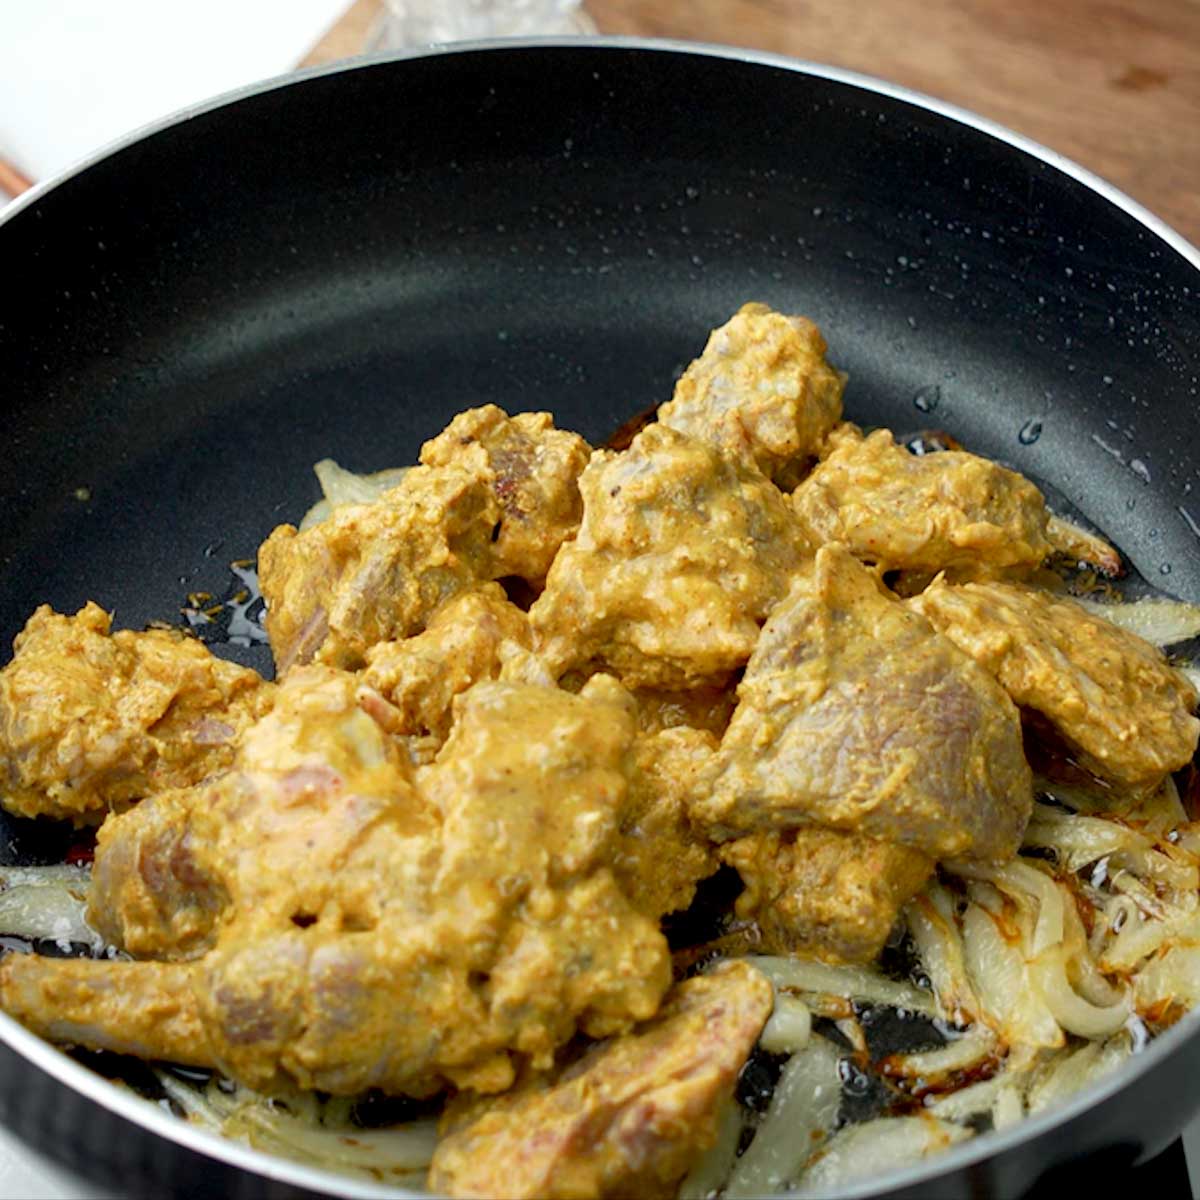 Marinated mutton pieces sizzling in a pan